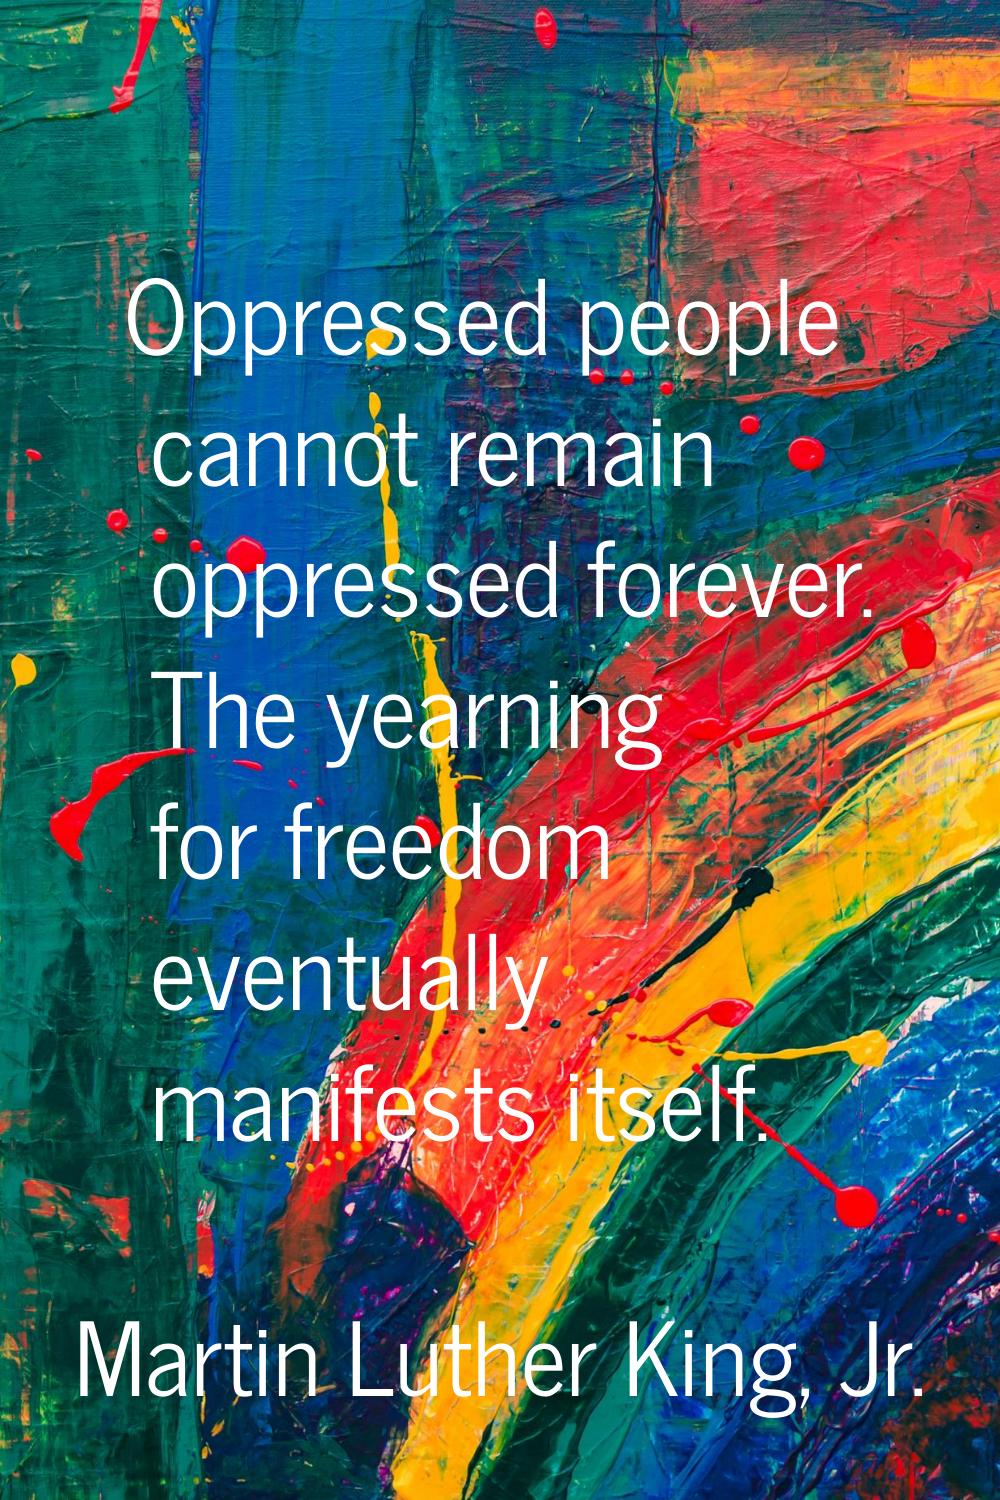 Oppressed people cannot remain oppressed forever. The yearning for freedom eventually manifests its